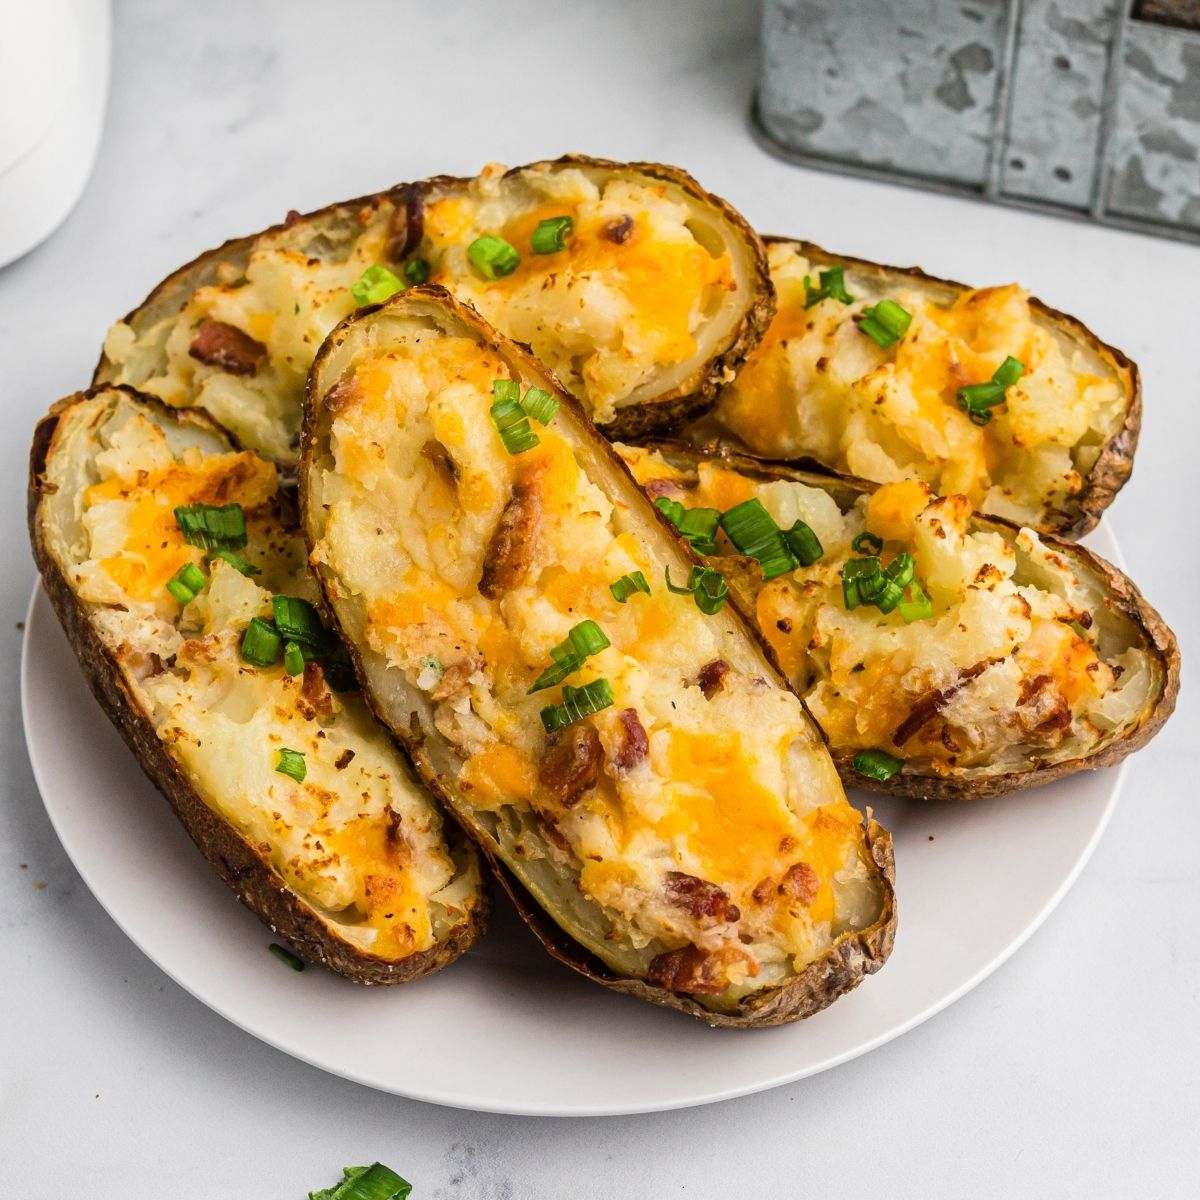 How to Make Baked Potatoes in the Oven - Fed & Fit